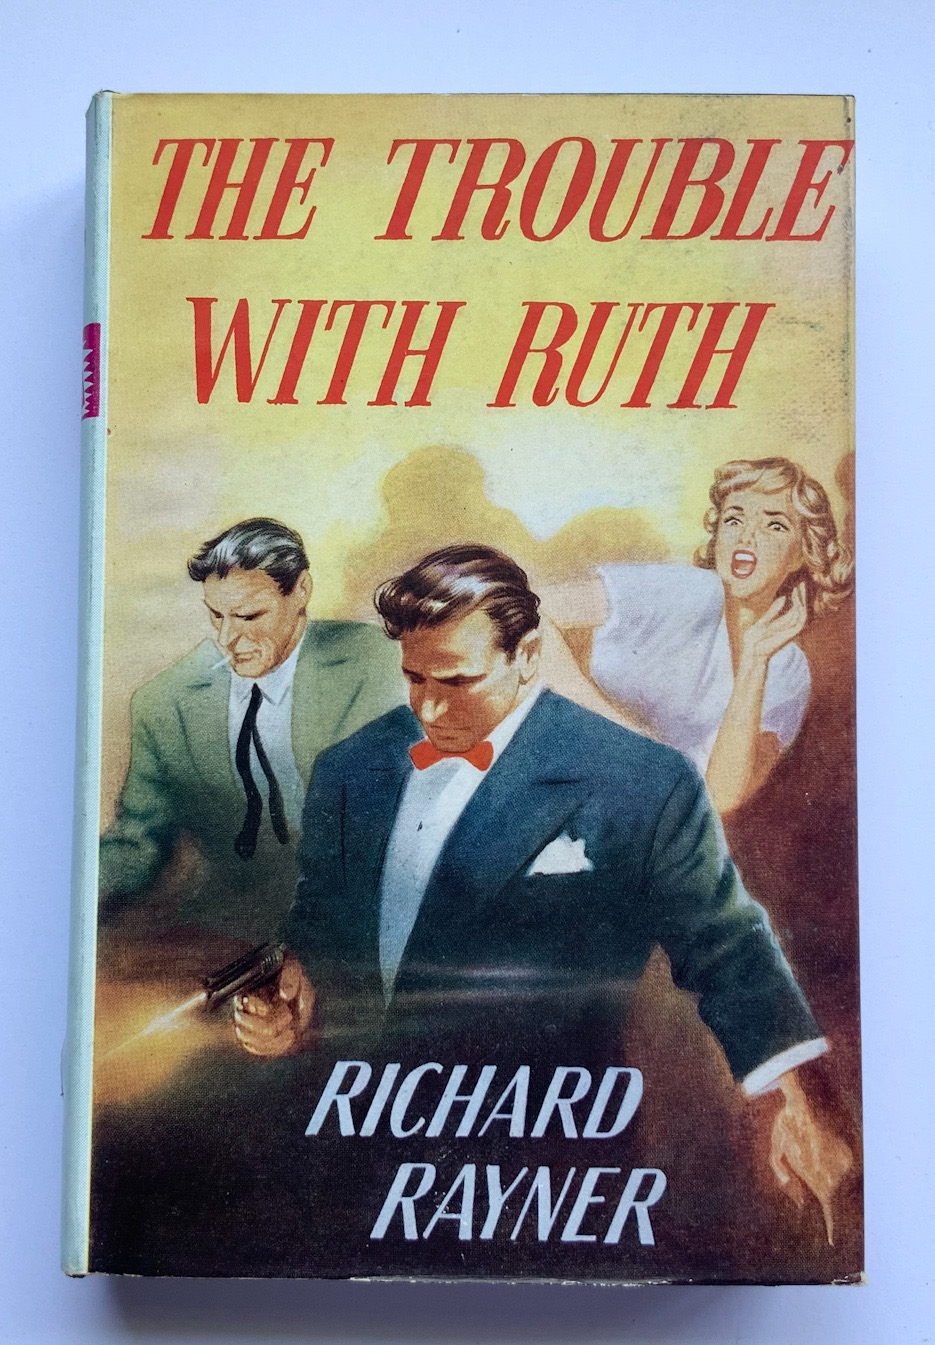 THE TROUBLE WITH RUTH British crime book by Richard Rayner 1960 1st edition